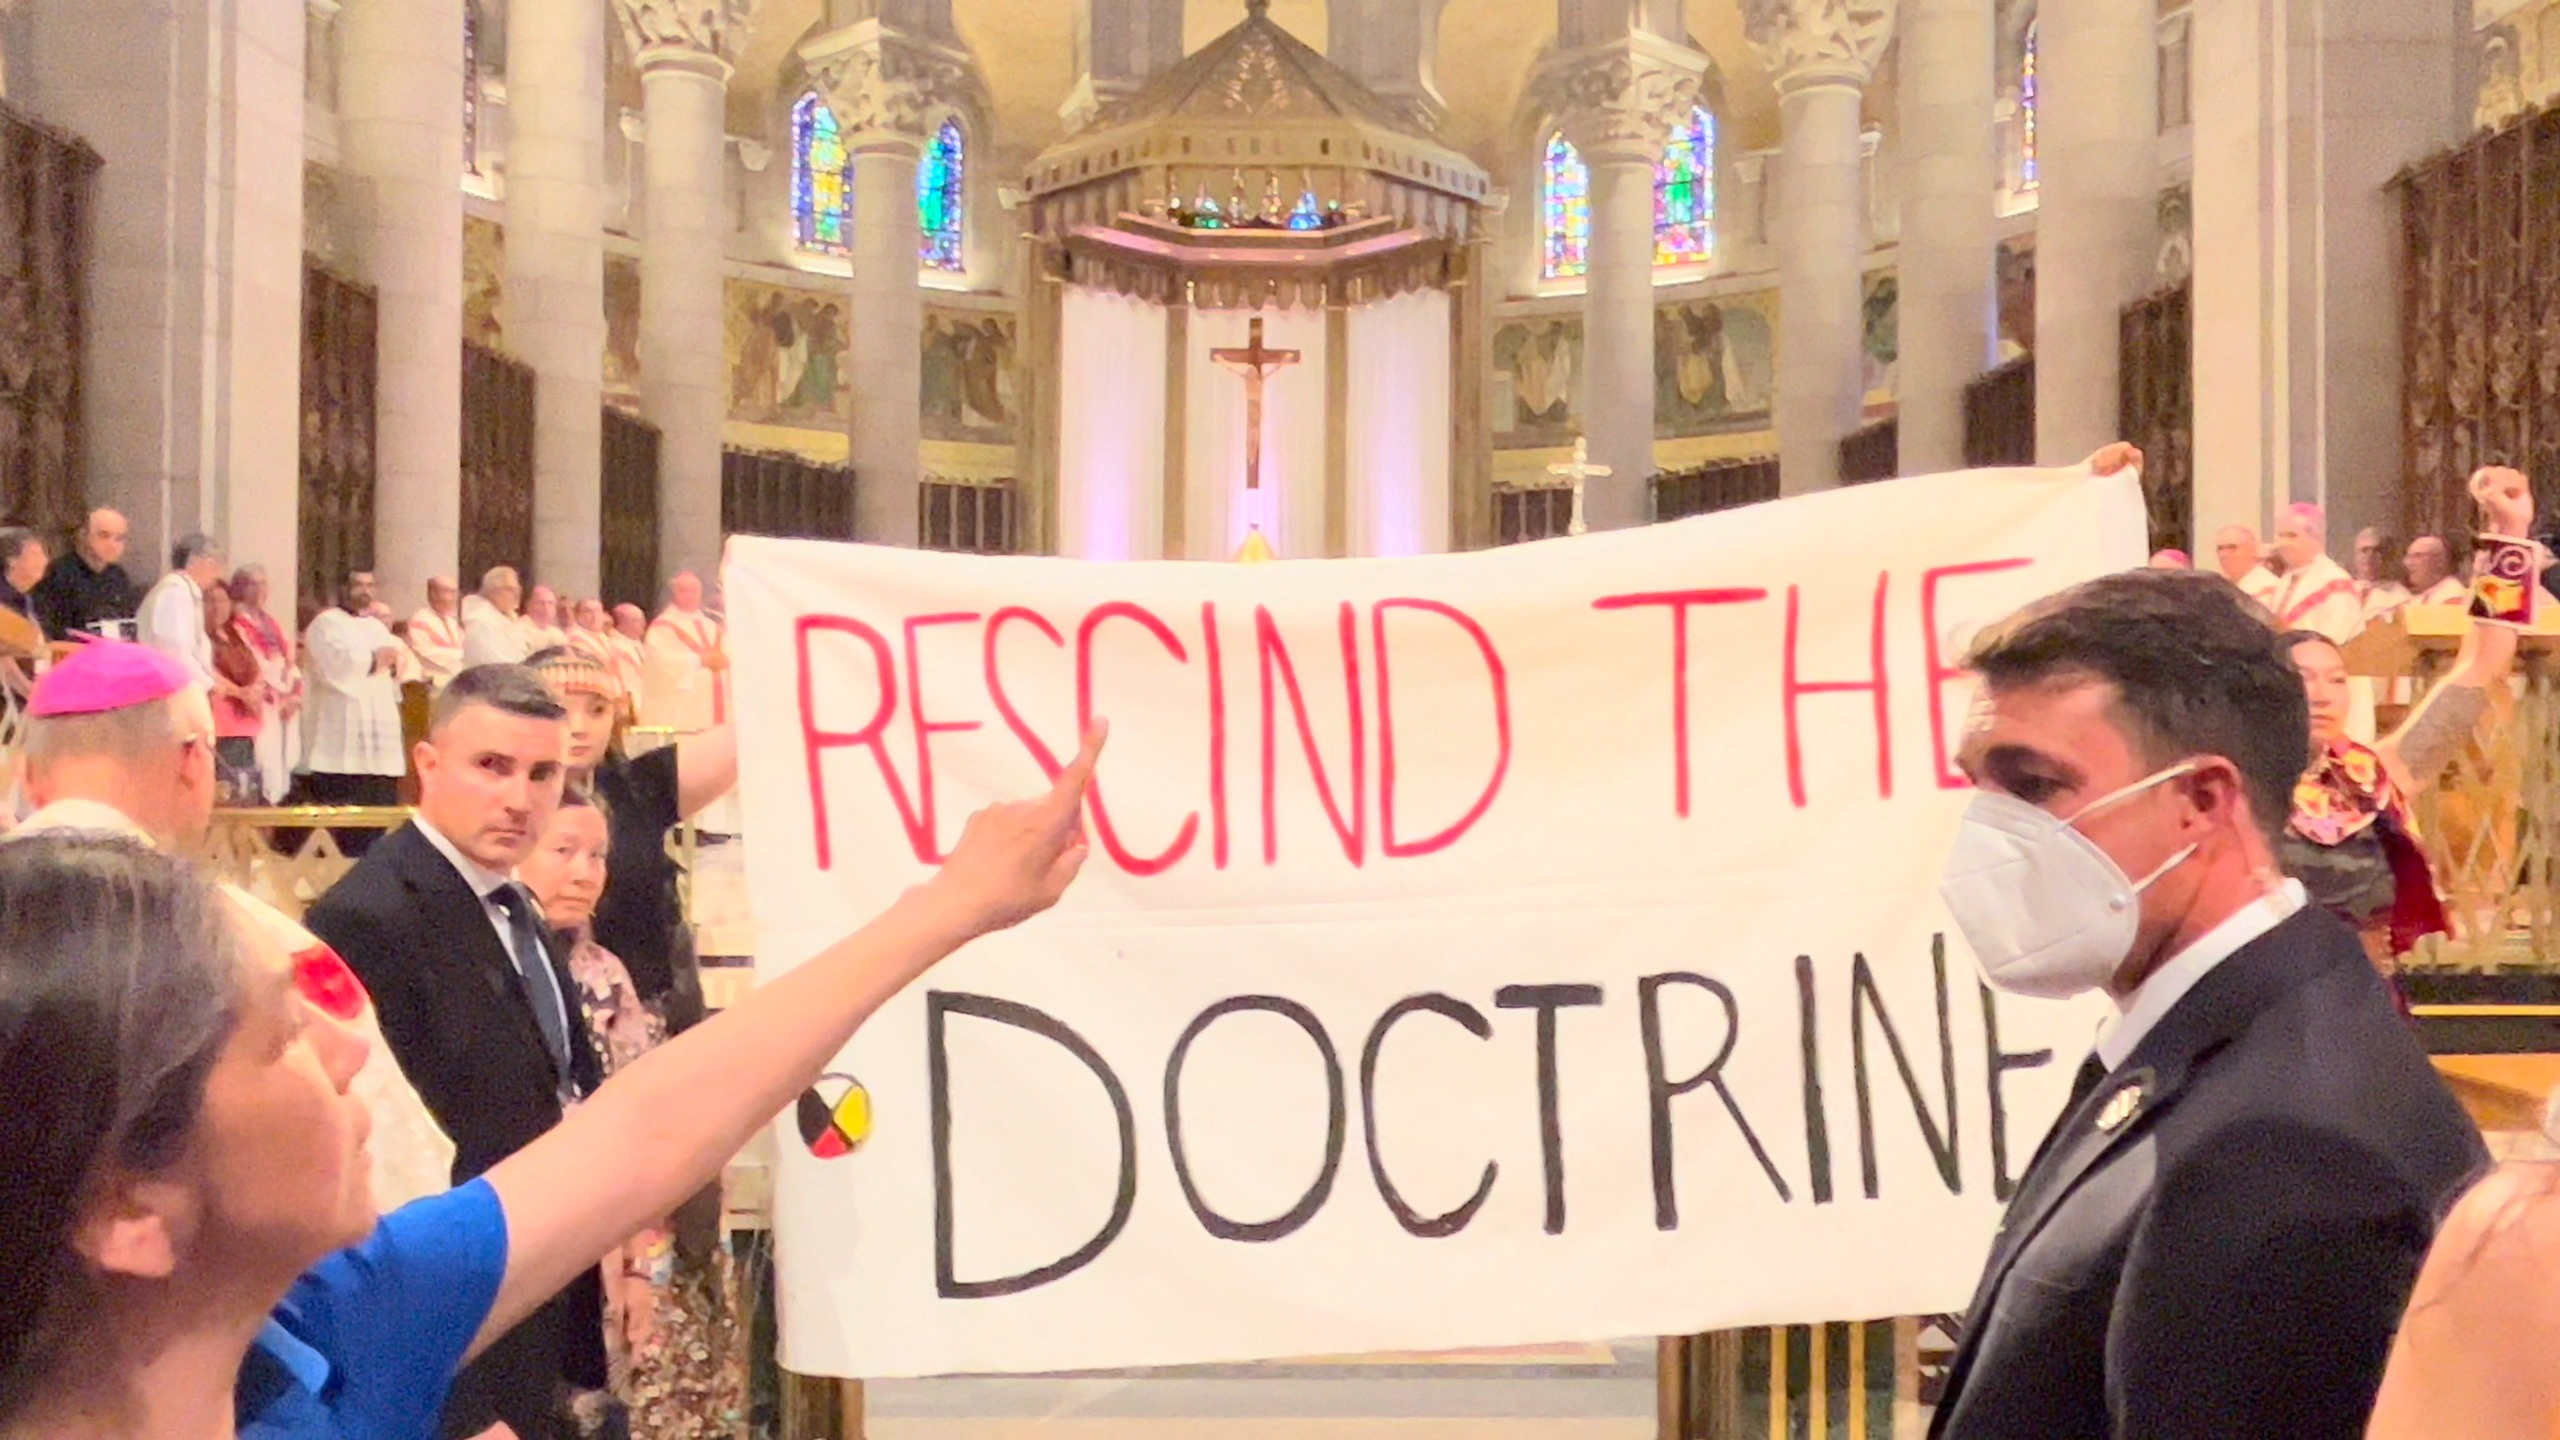 Indigenous people hold a banner against the discovery doctrine during a Mass presided over by Pope Francis at the Shrine of Sainte-Anne-de-Beaupre, Quebec